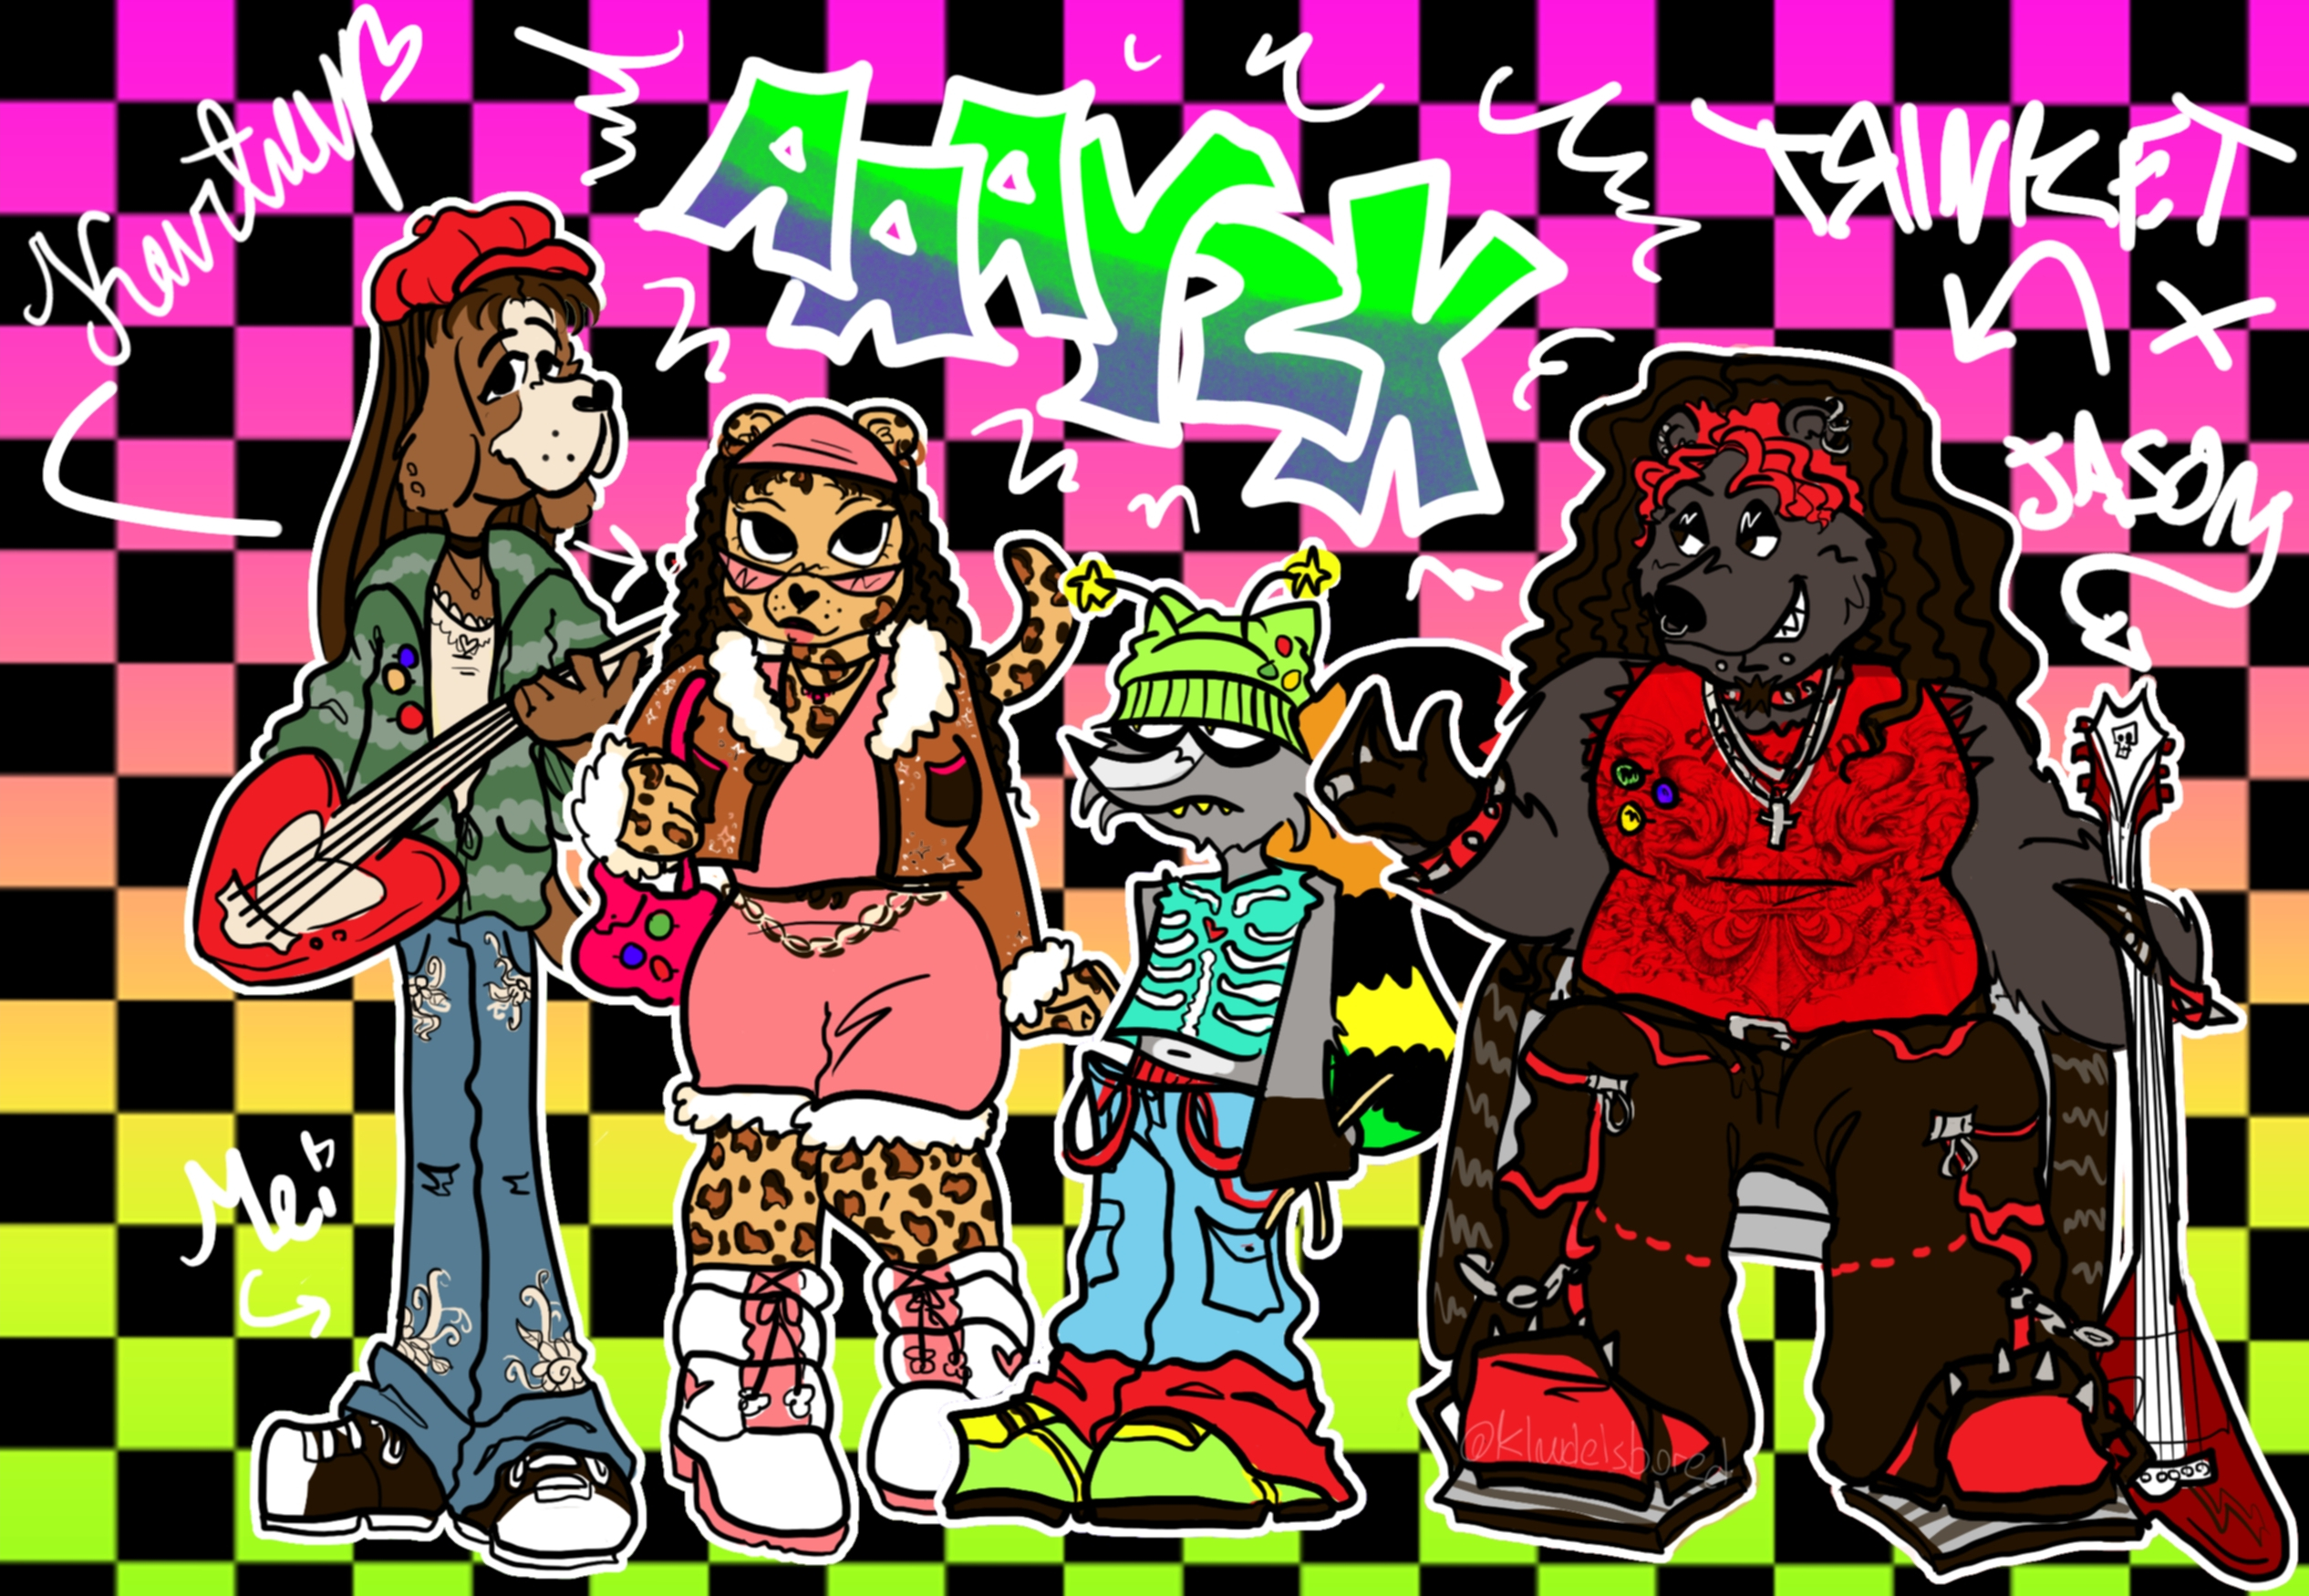 The band members of AAAY2K against a rainbow and black checkered background, their logo 'AAAY2K,' and their signatures. From left to right is Mei, a basset hound in casual clothing holding a bass in the shape of a heart, Kourtney, a fashionable leopard wearing a lot of pink with braids, Trinket, a raccoon in a colorful eyesore getup and a rainbow tail, and Jason, a metalhead bear in a wheelchair, holding a red guitar.